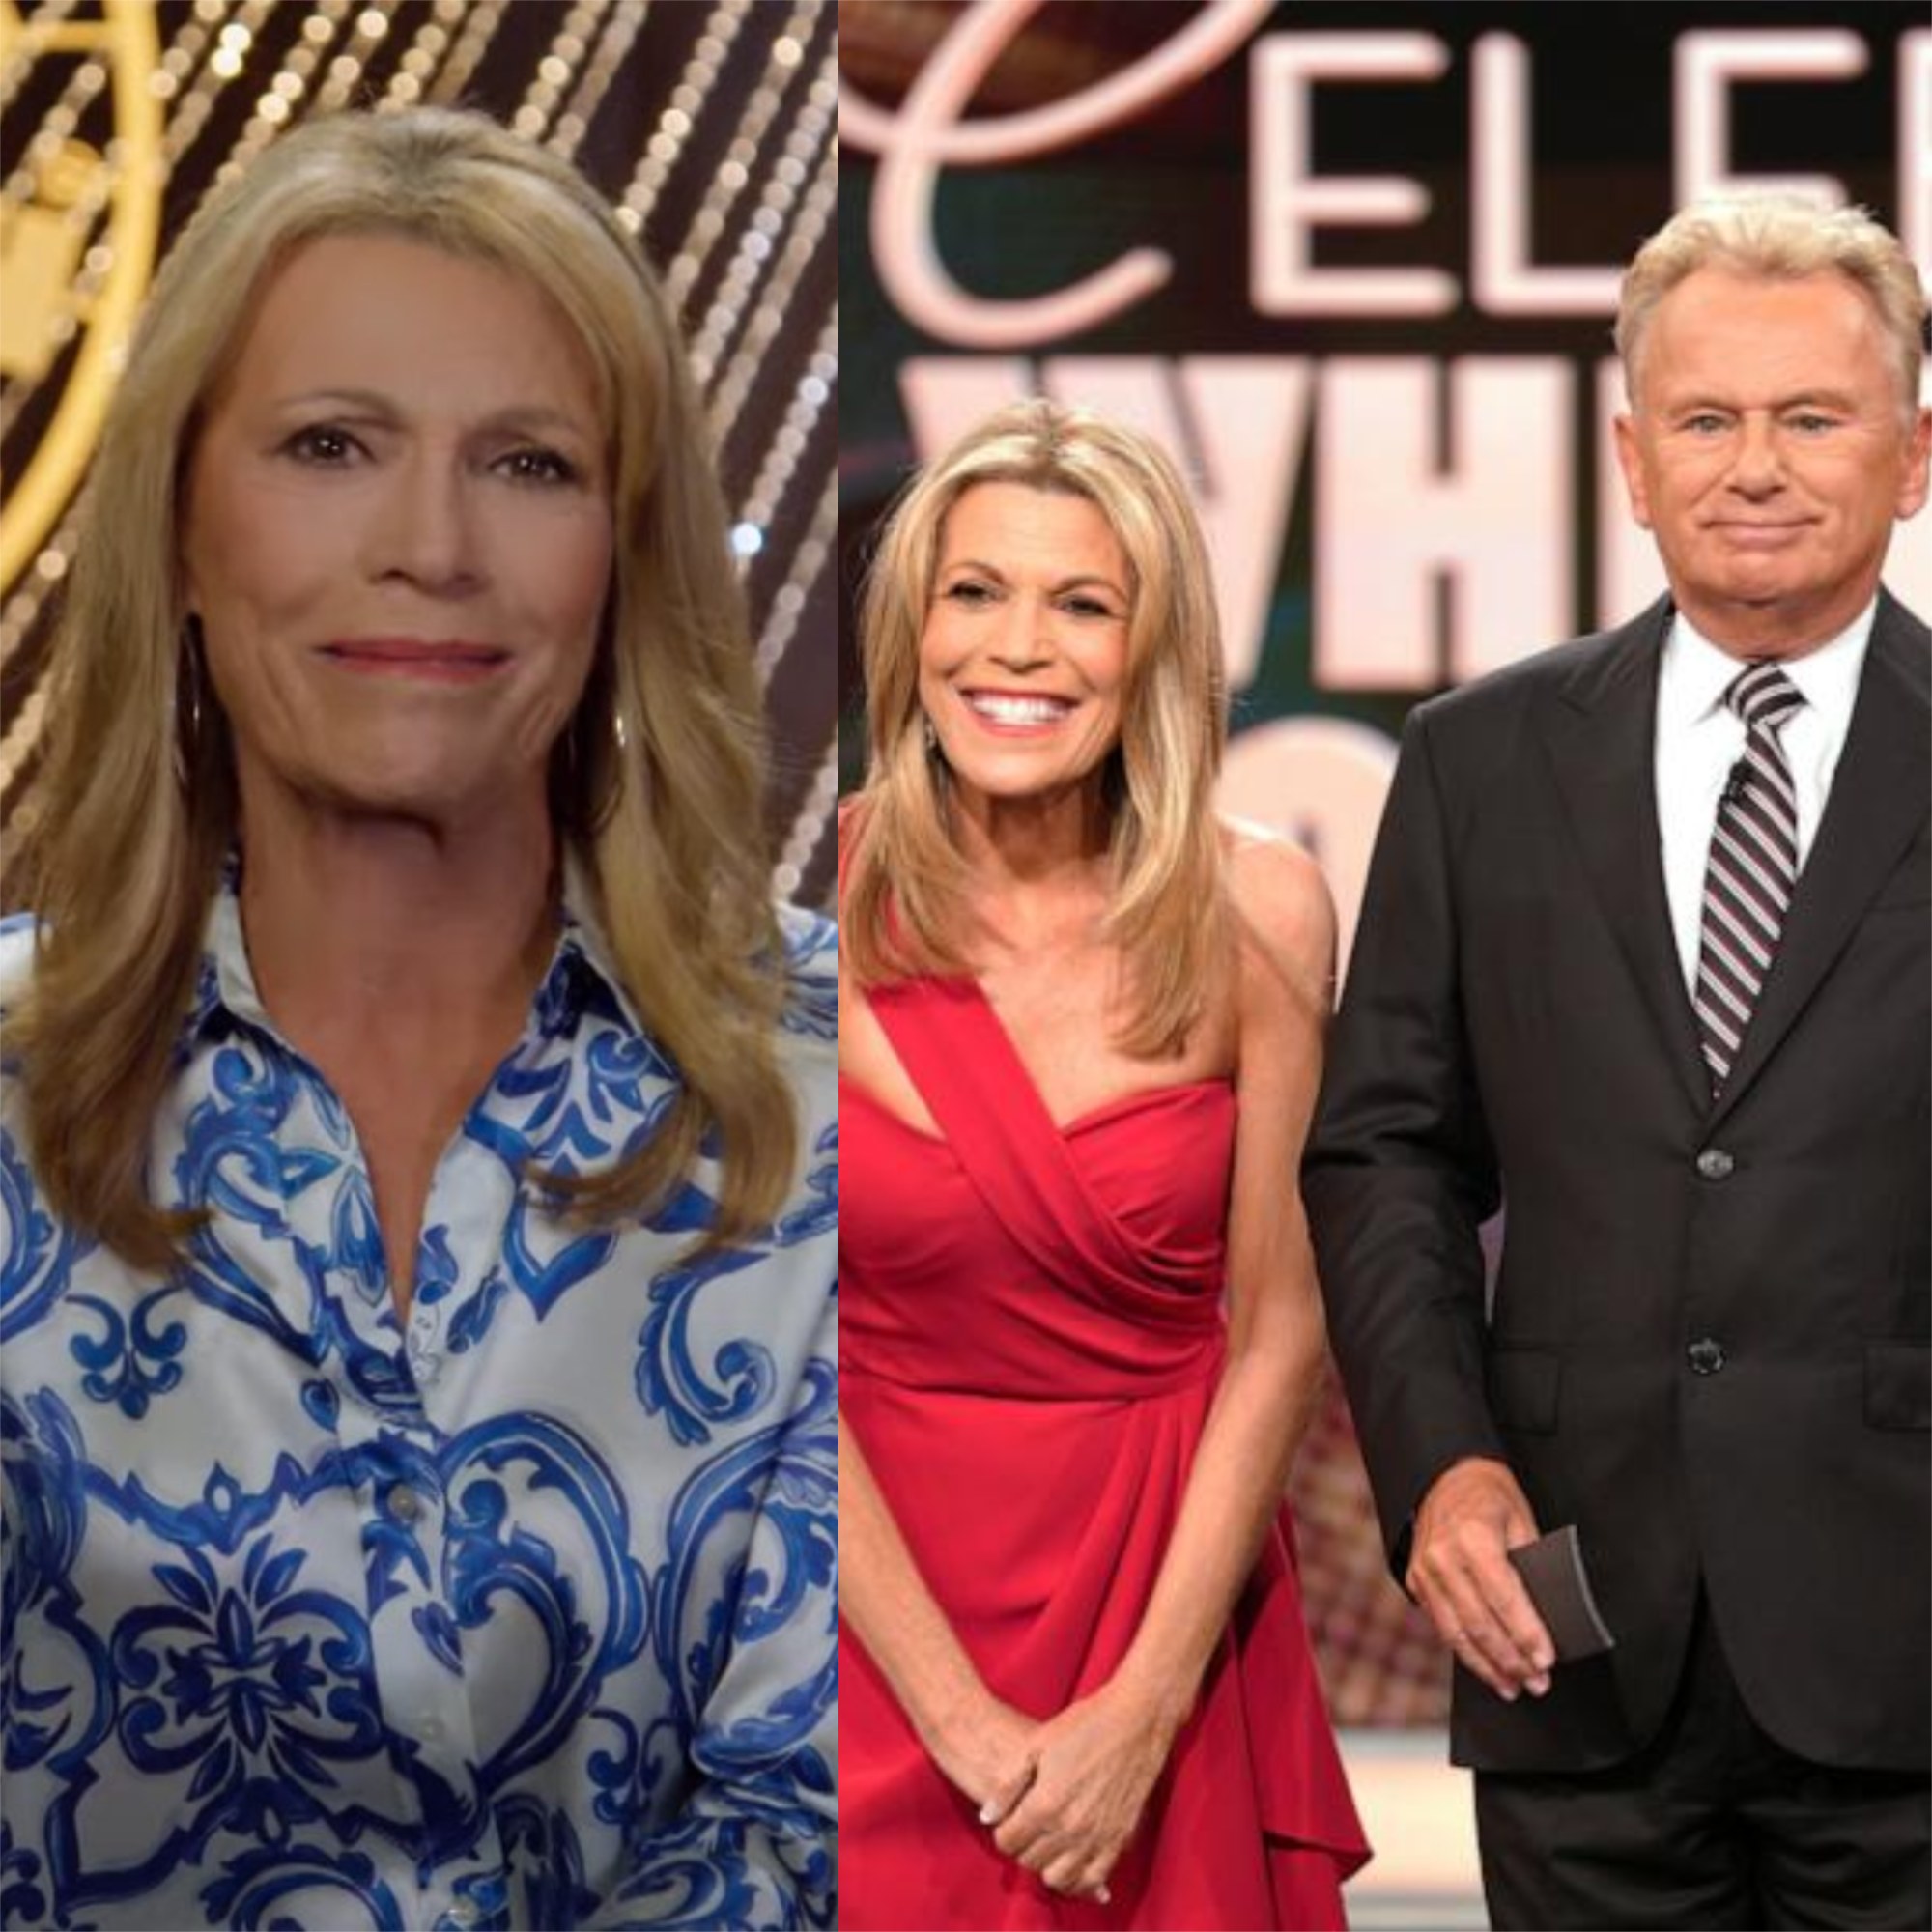 On the eve of Pat Sajak’s final ‘Wheel of Fortune’ episode, his co-host Vanna White delivered a heartfelt goodbye. 💔😢 I don’t know about you, but I had tears in my eyes. Check comments for video 👇